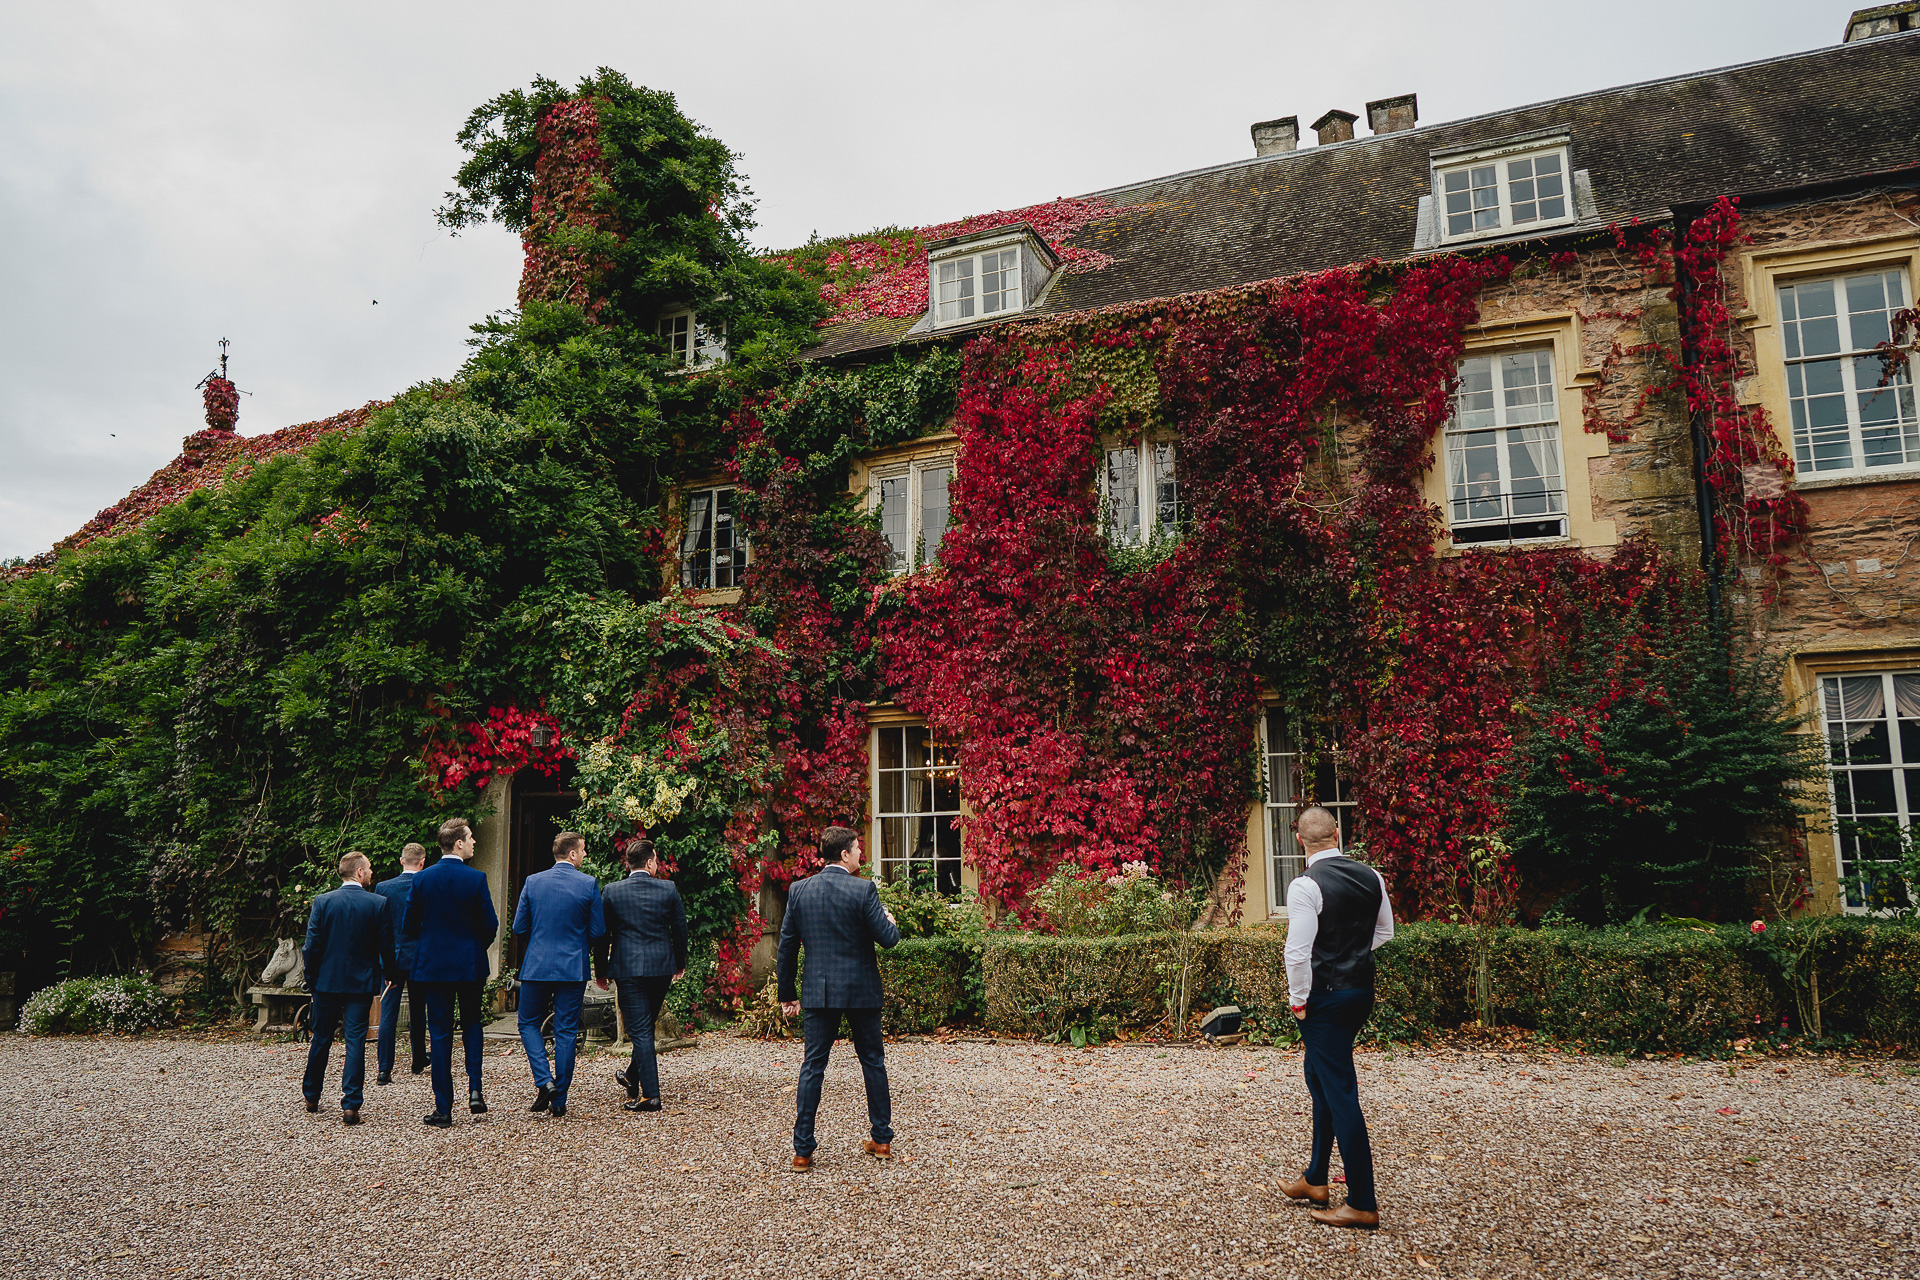 A group of men walking towards a building covered in red Virginia creeper